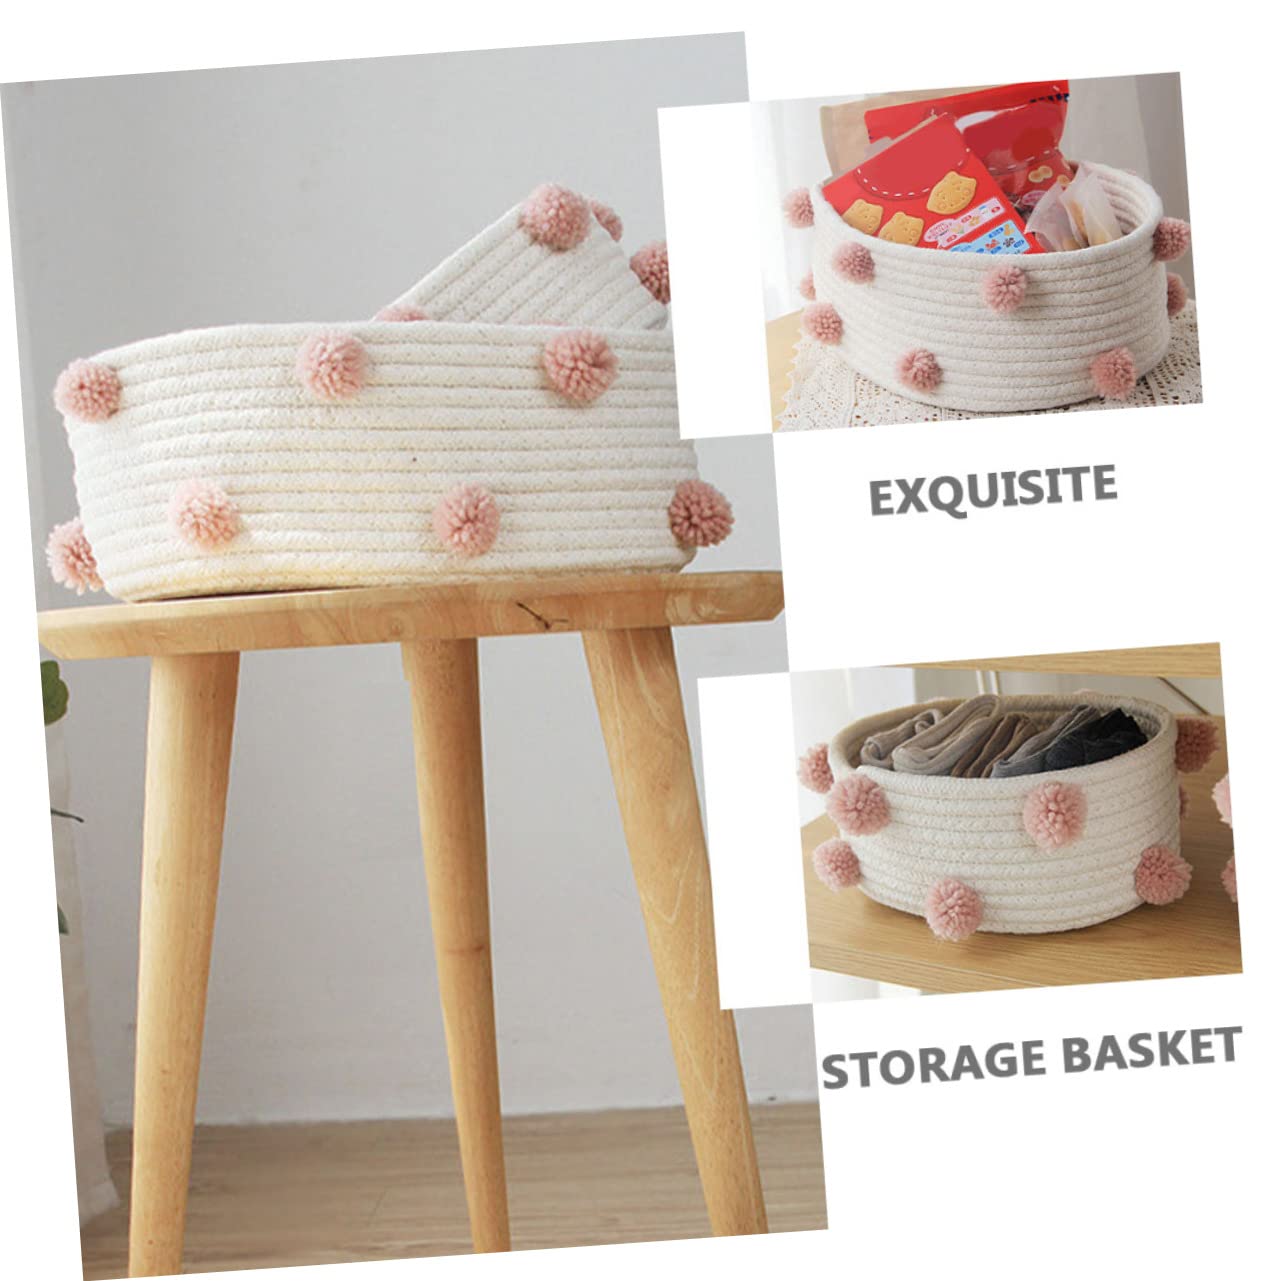 CHILDWEET Woven Hamper Storage Basket Cotton Rope Organizer Cotton Rope Key Tray Rope Woven Basket Storage Bins for Clothes Storage Bin Cotton Woven Container Manual Baby Cotton Makeup Box